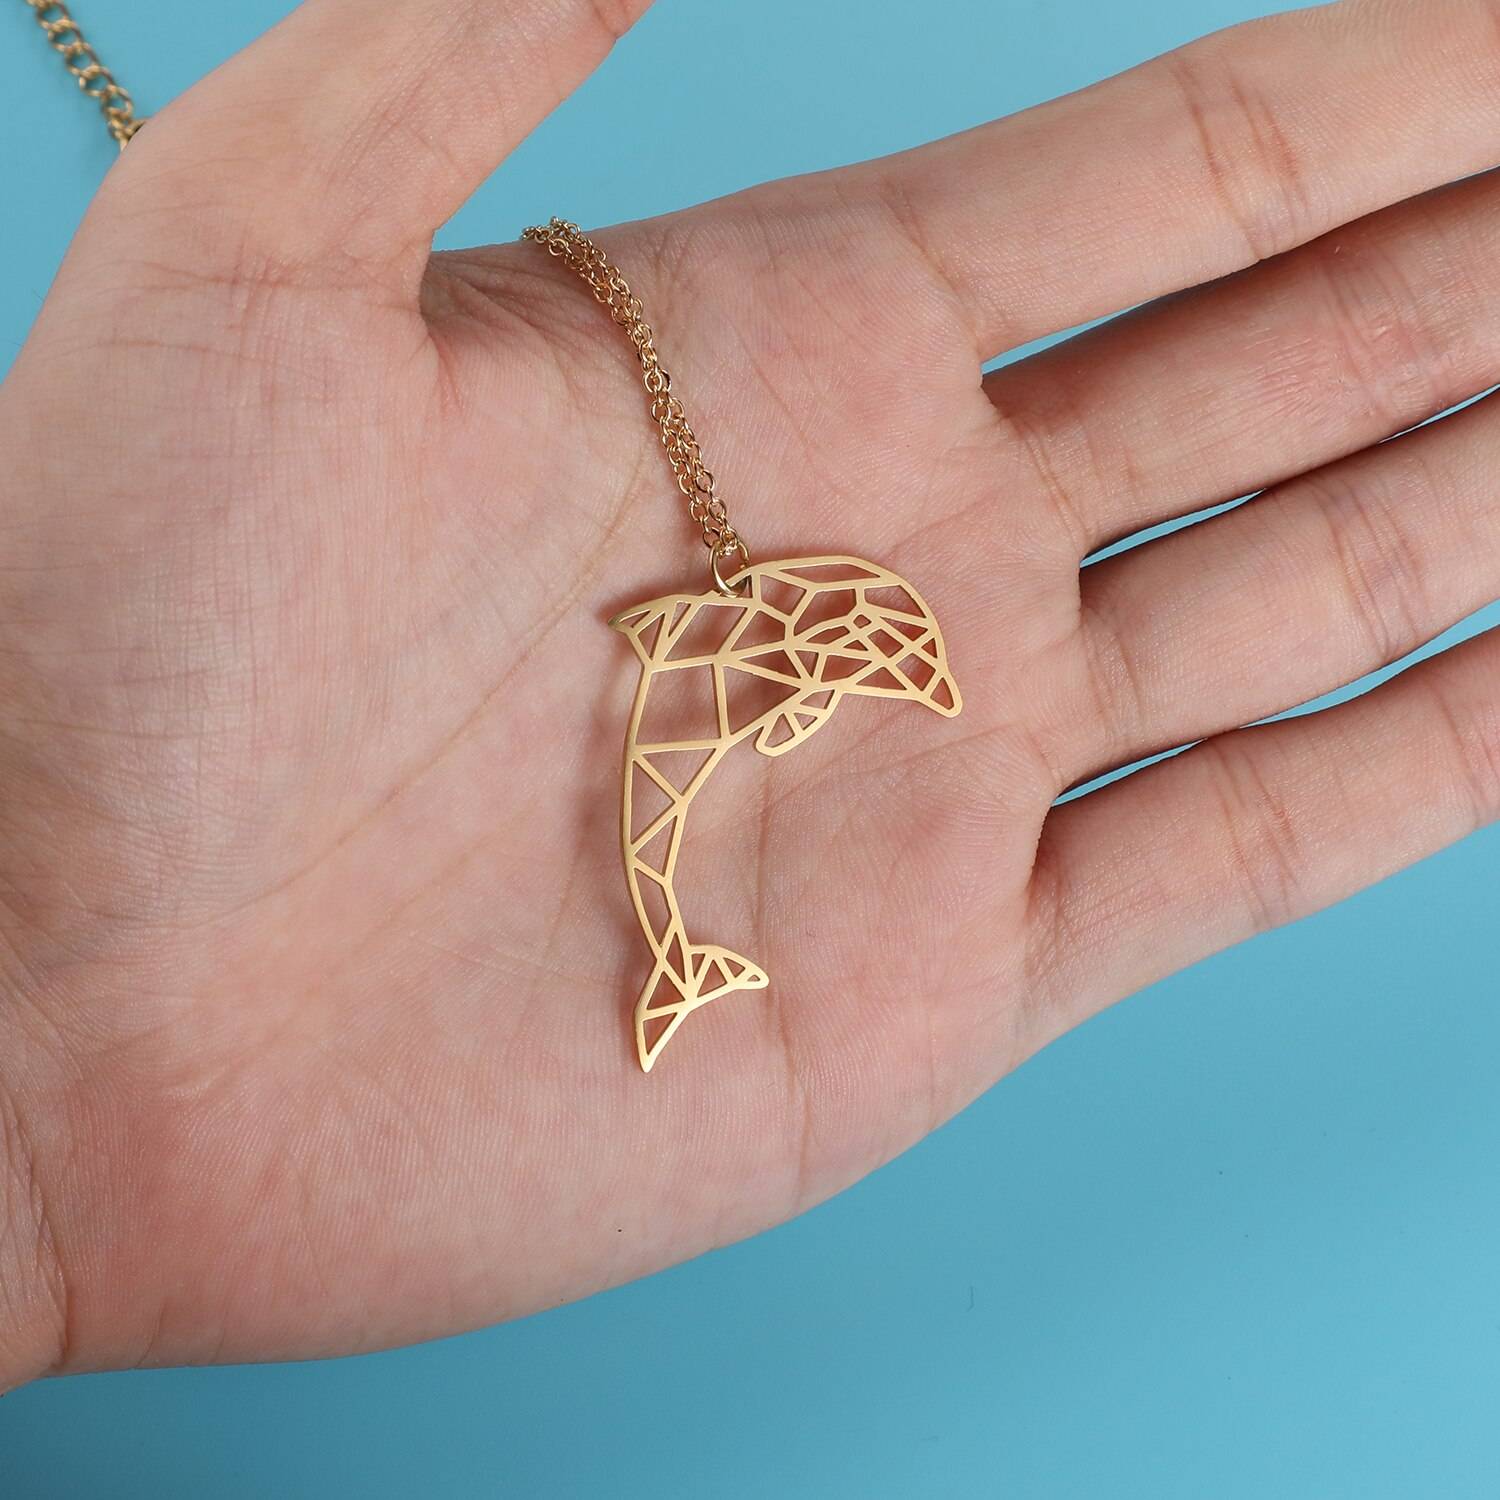 Playful Dolphin Origami Necklace on hand